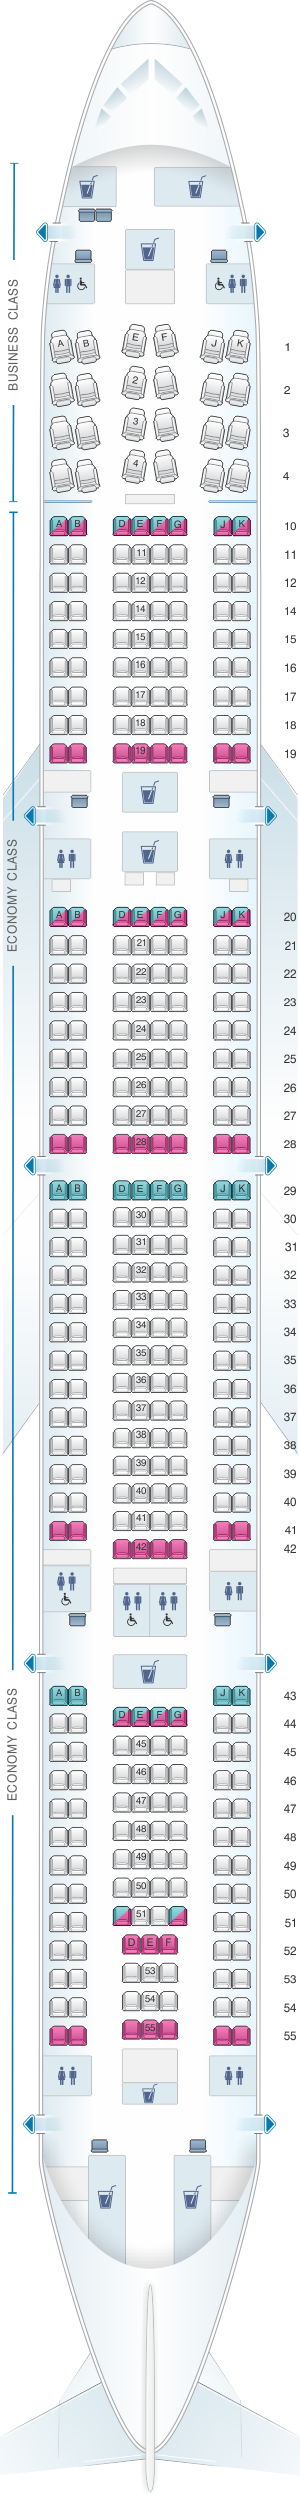 Seat map for Qatar Airways Airbus A340 600